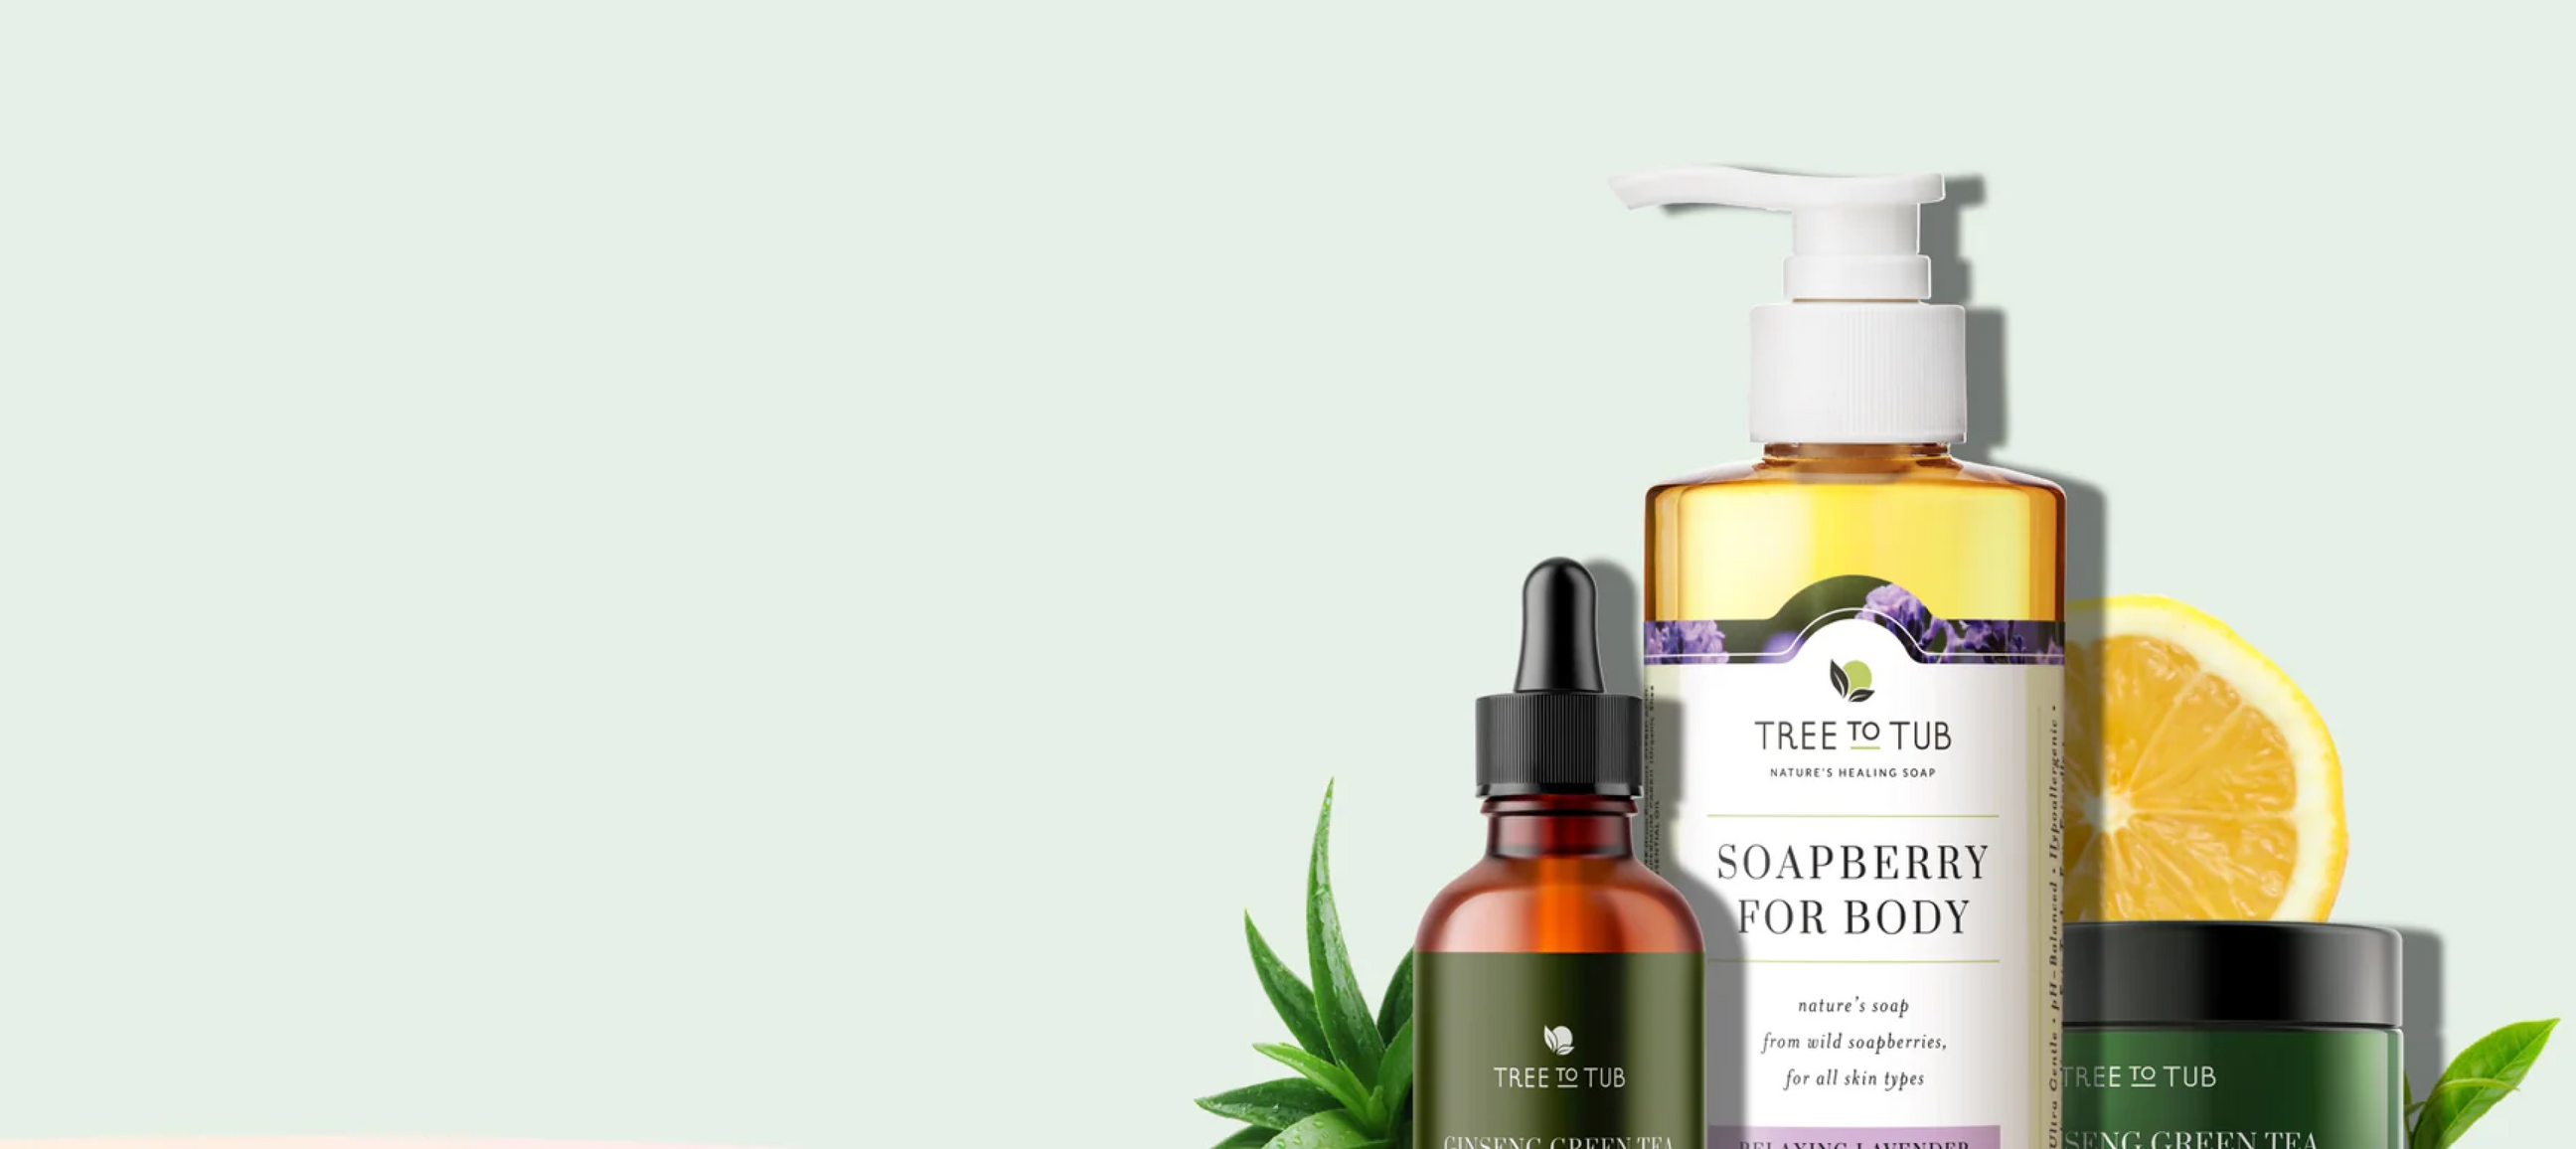 Products for skin care from Tree To Tub brand